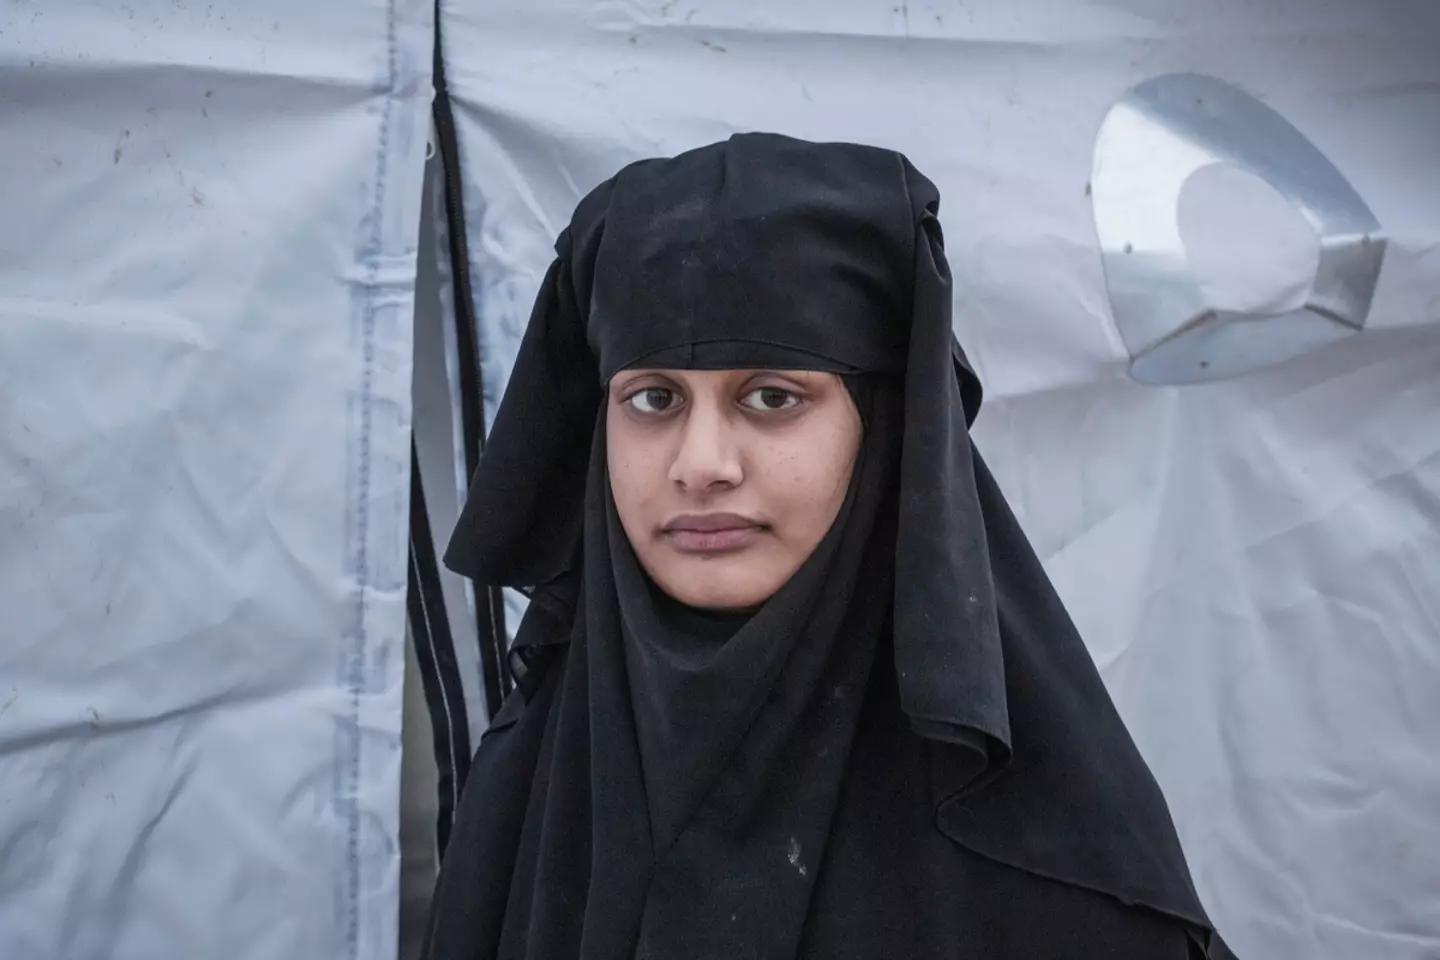 Shamima Begum’s legal fight to regain her British citizenship is set to begin today (24 October) at the Court of Appeal.